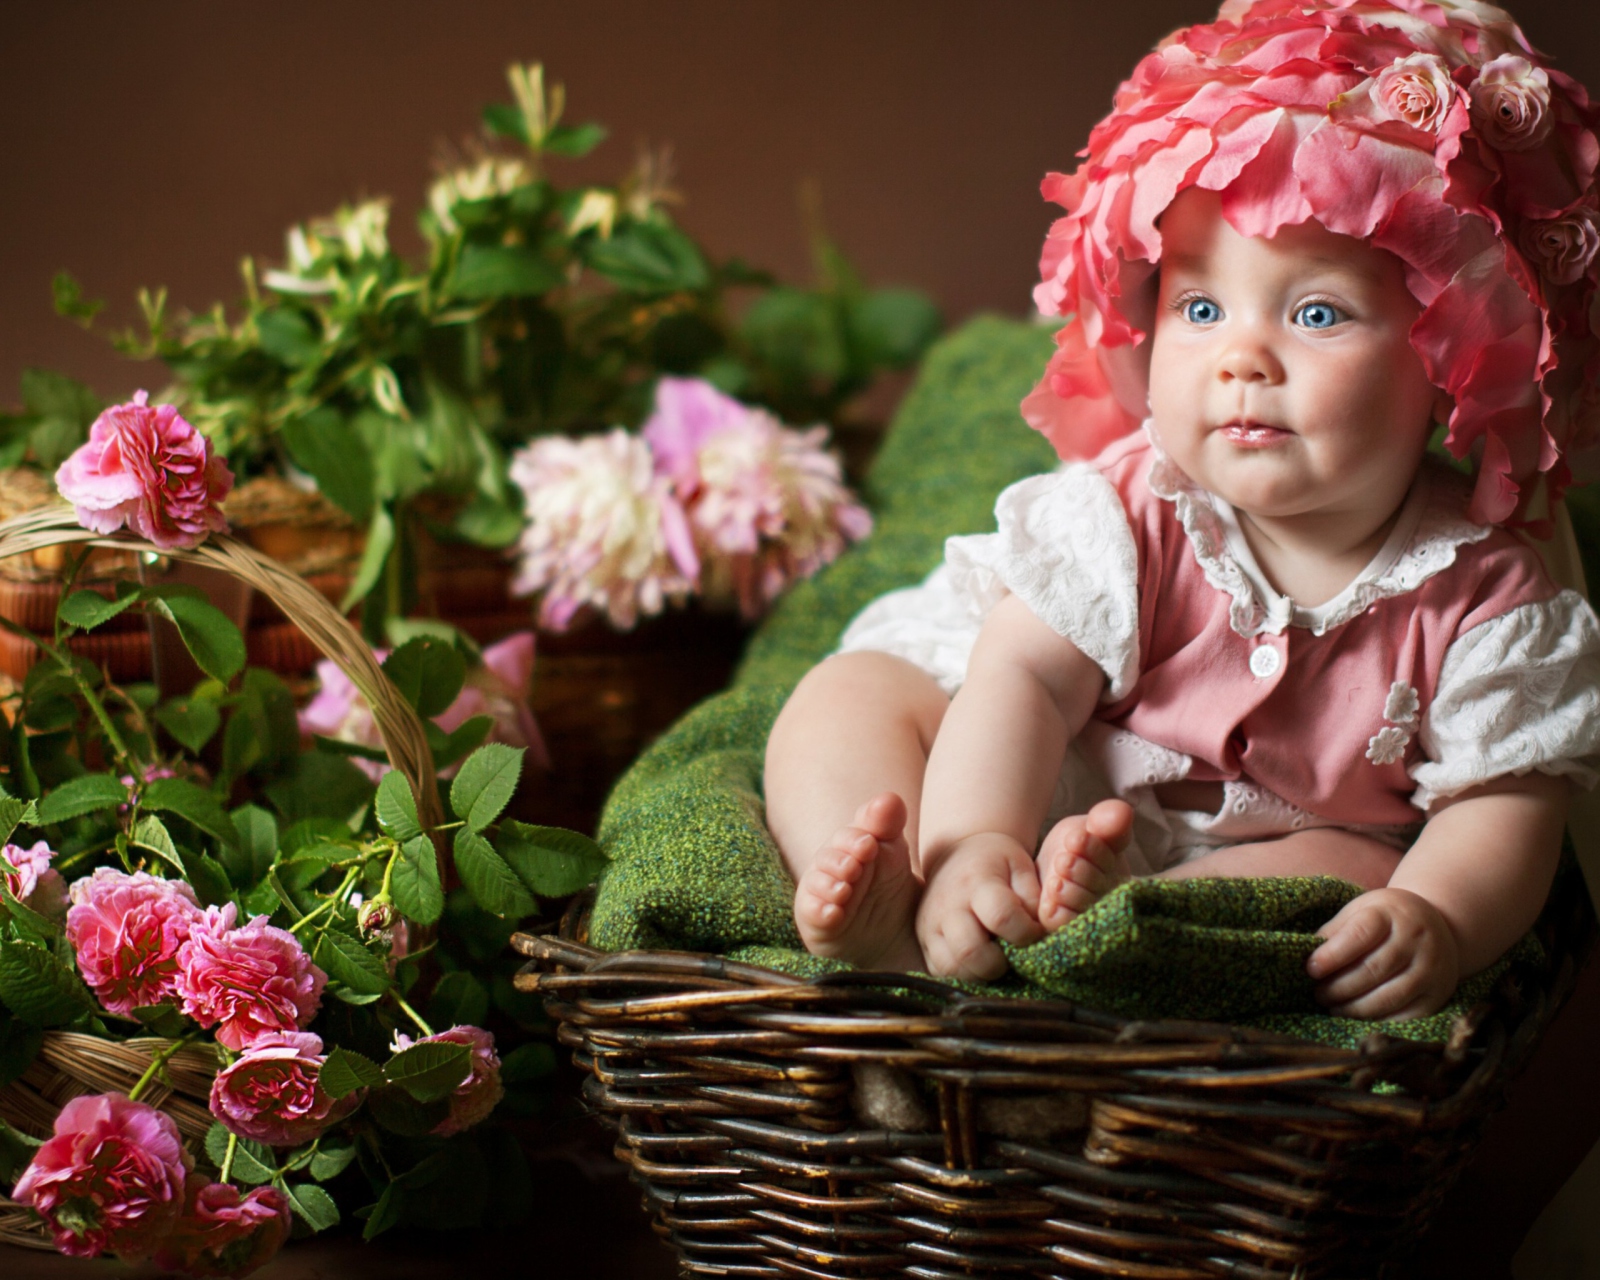 Cute Baby With Blue Eyes And Roses screenshot #1 1600x1280